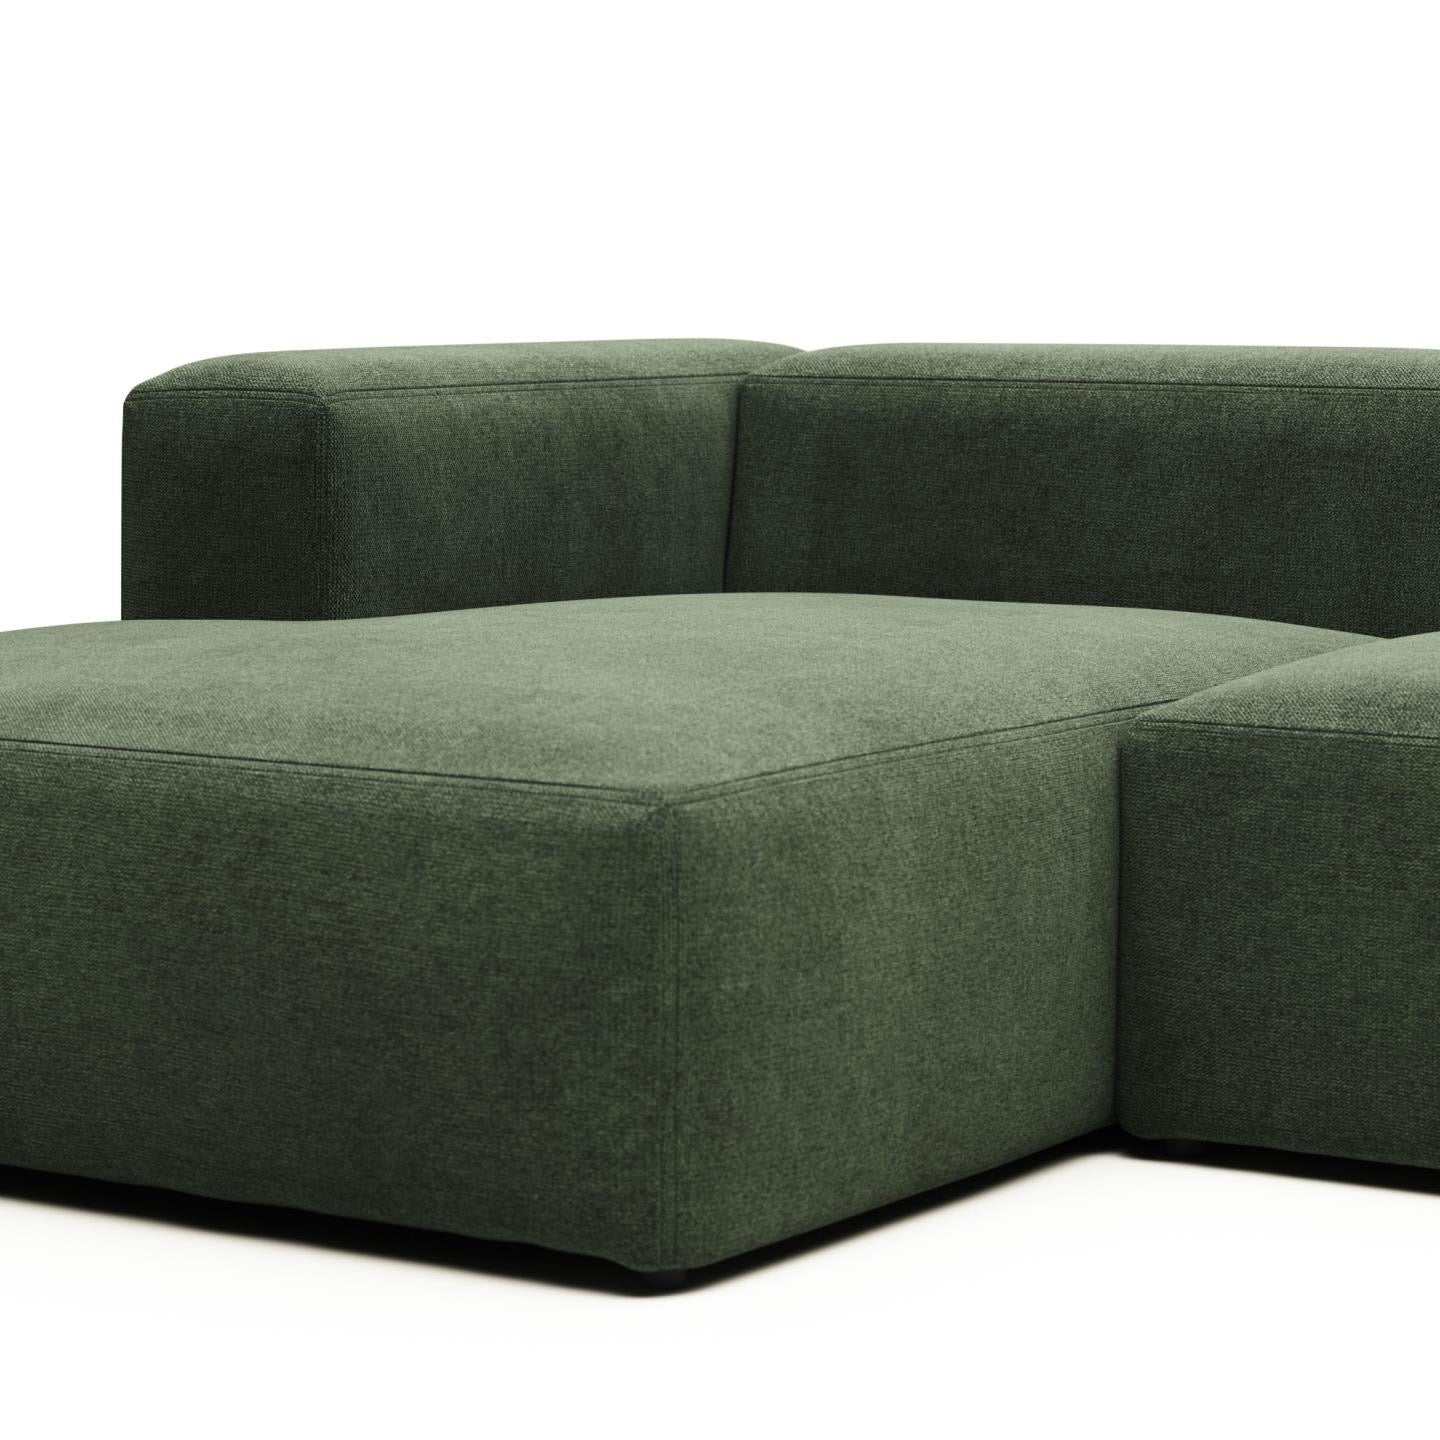 Lund 3 Seater Sofa with Left Side Chaise - Green